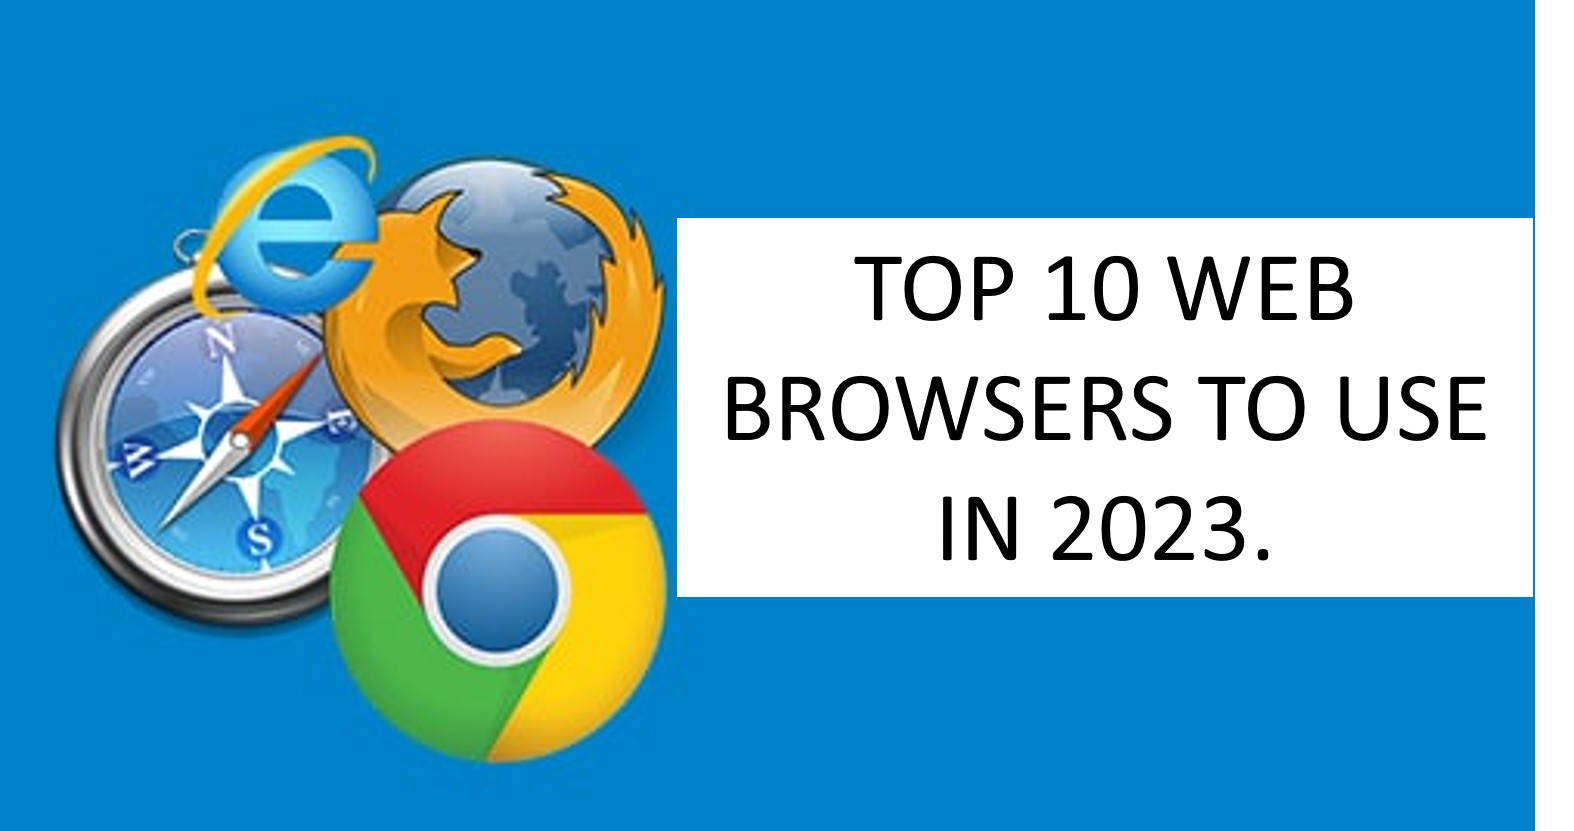 Top 10 Web Browsers to Use in 2023